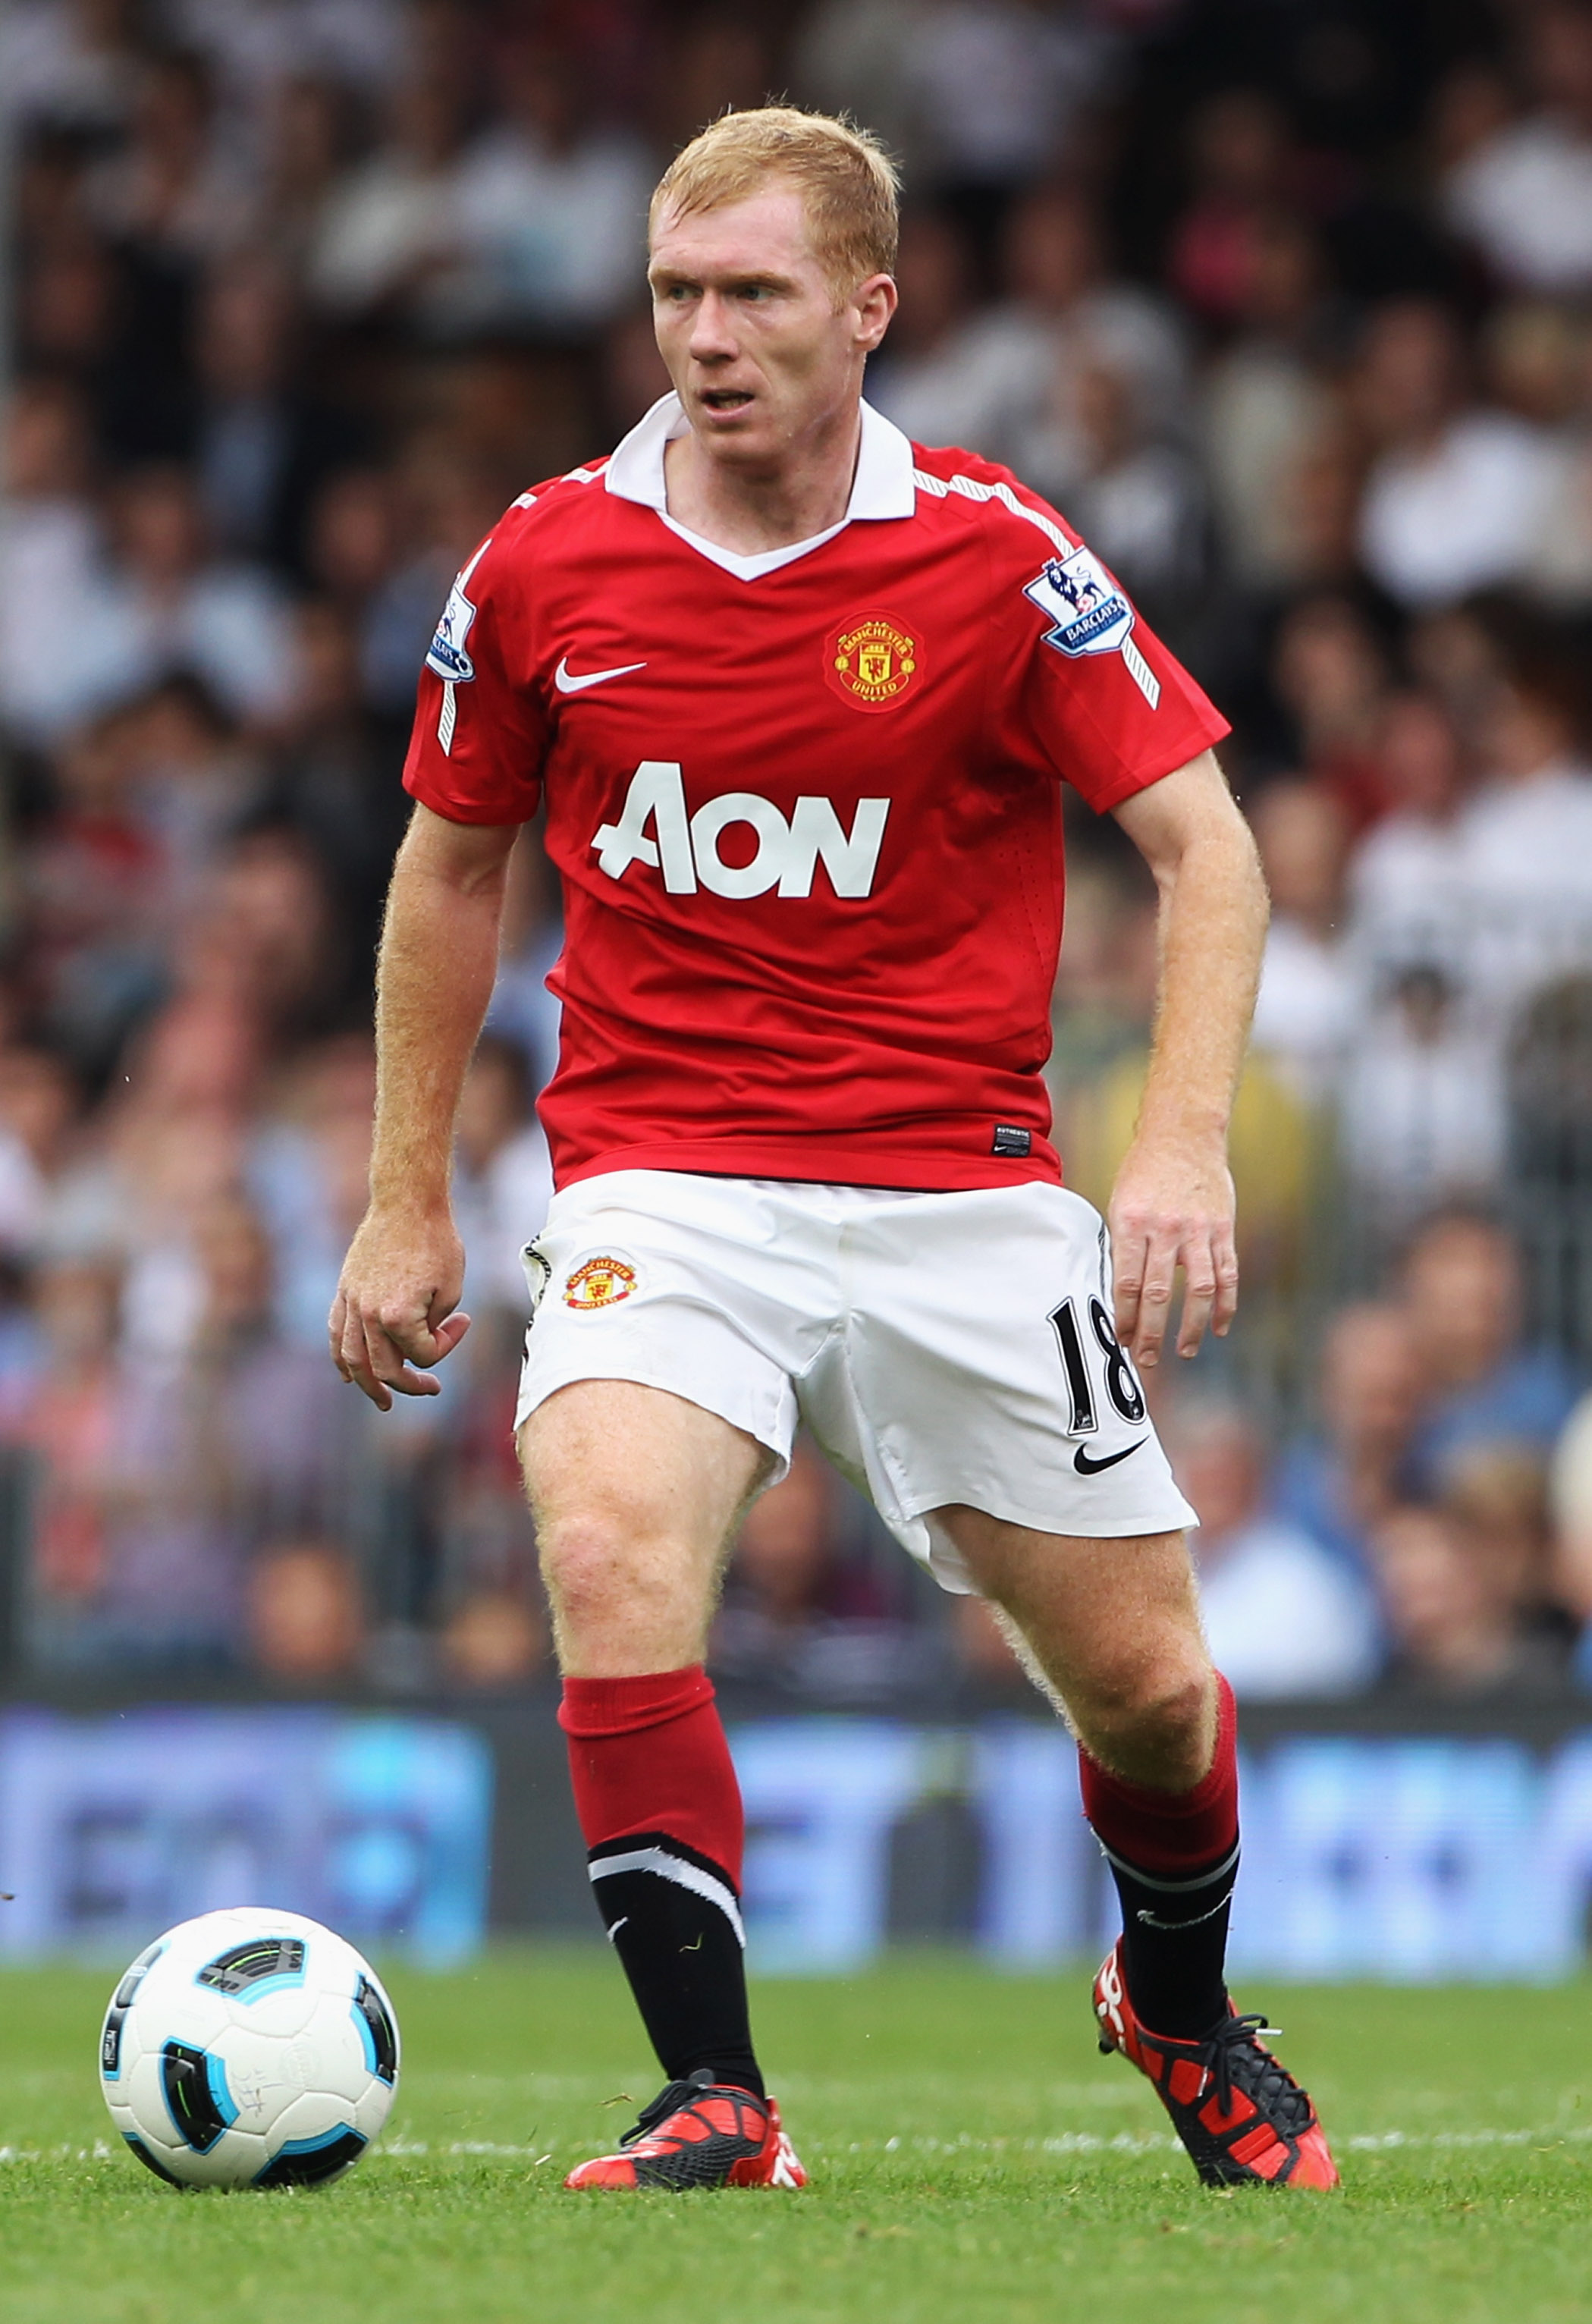 LONDON, ENGLAND - AUGUST 22:  Paul Scholes of Manchester United in action during the Barclays Premier League match between Fulham and Manchester United at Craven Cottage on August 22, 2010 in London, England.  (Photo by Phil Cole/Getty Images)